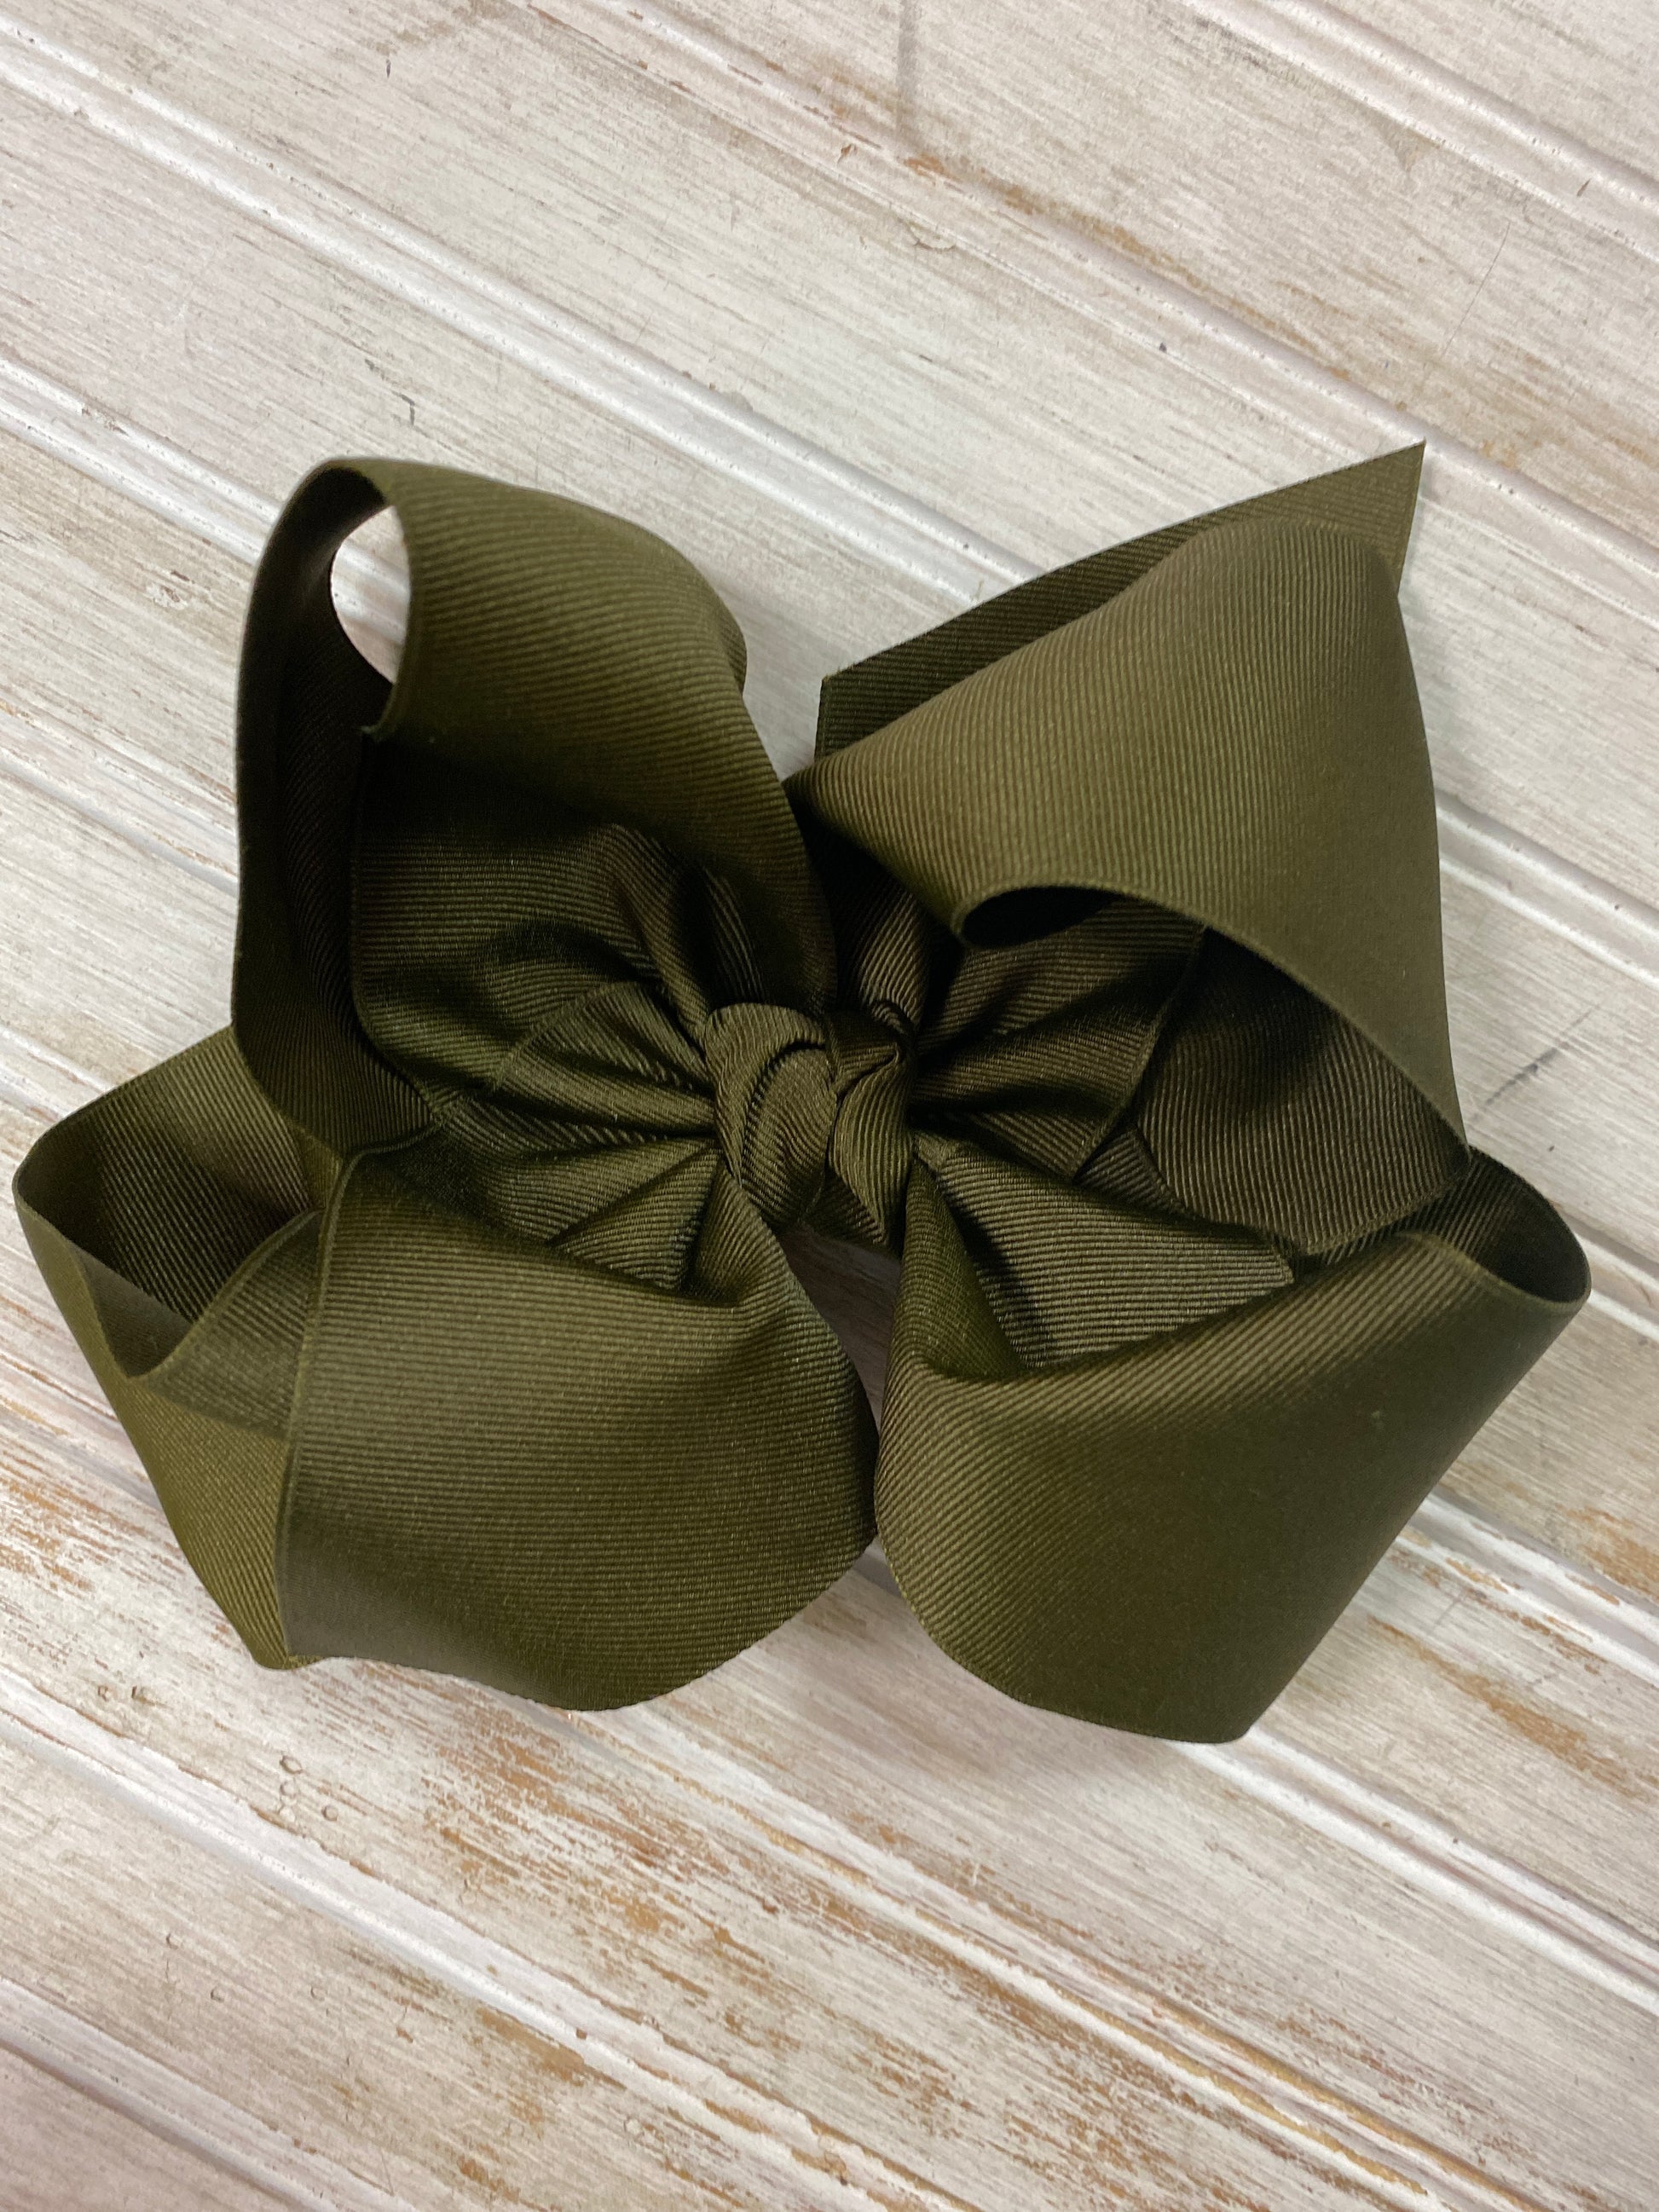 Texas Sized Bow in Moss  - Doodlebug's Children's Boutique